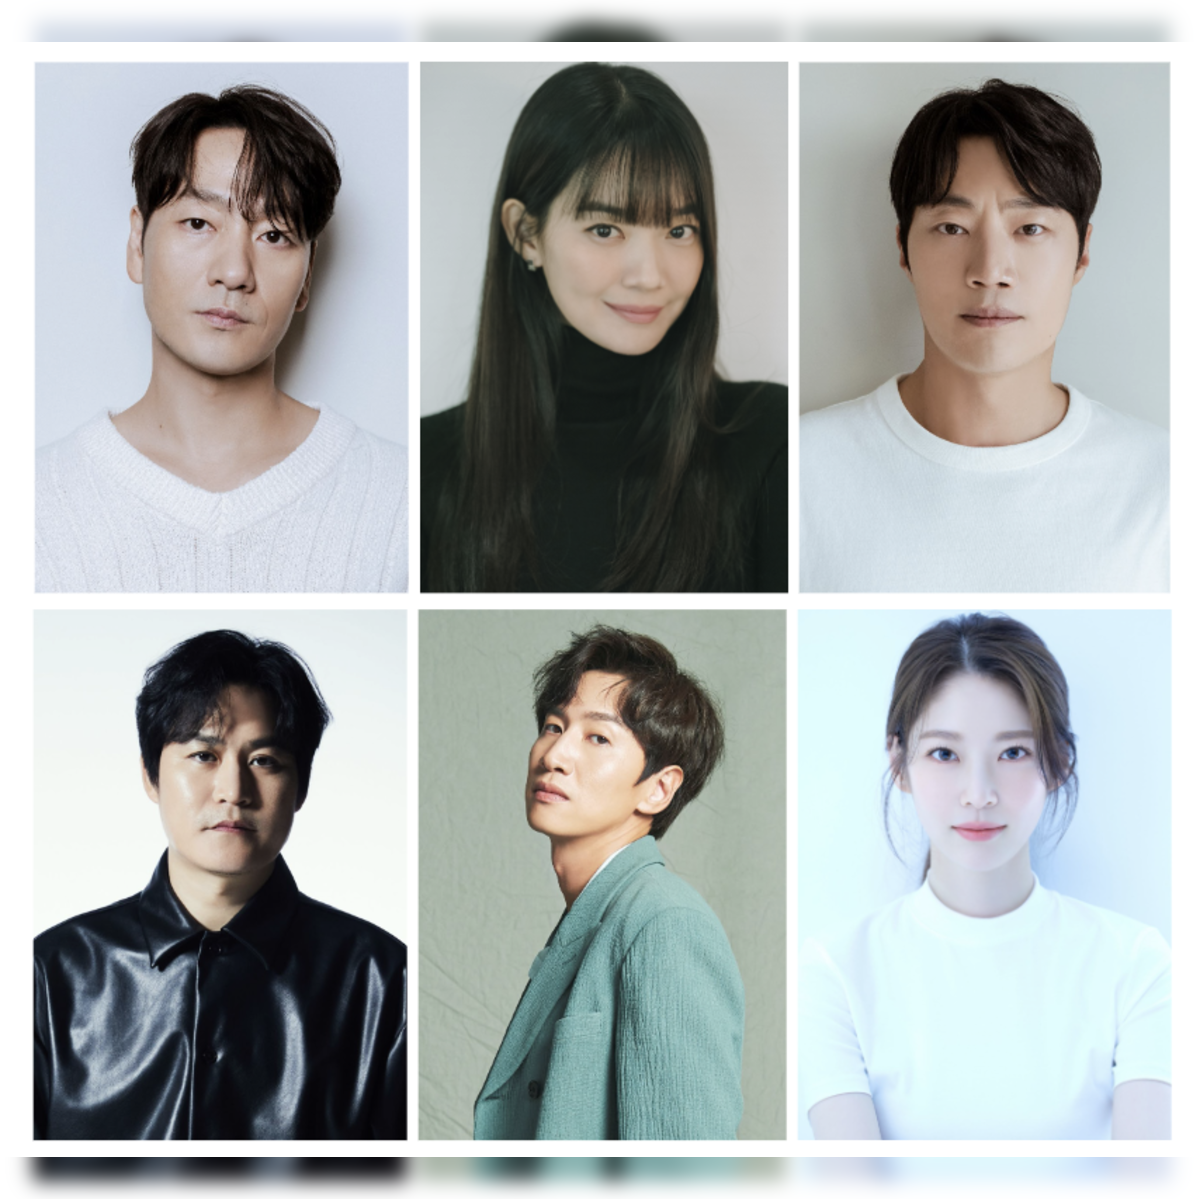 All of Us Are Dead: Release time, date and cast for Netflix's new K-drama